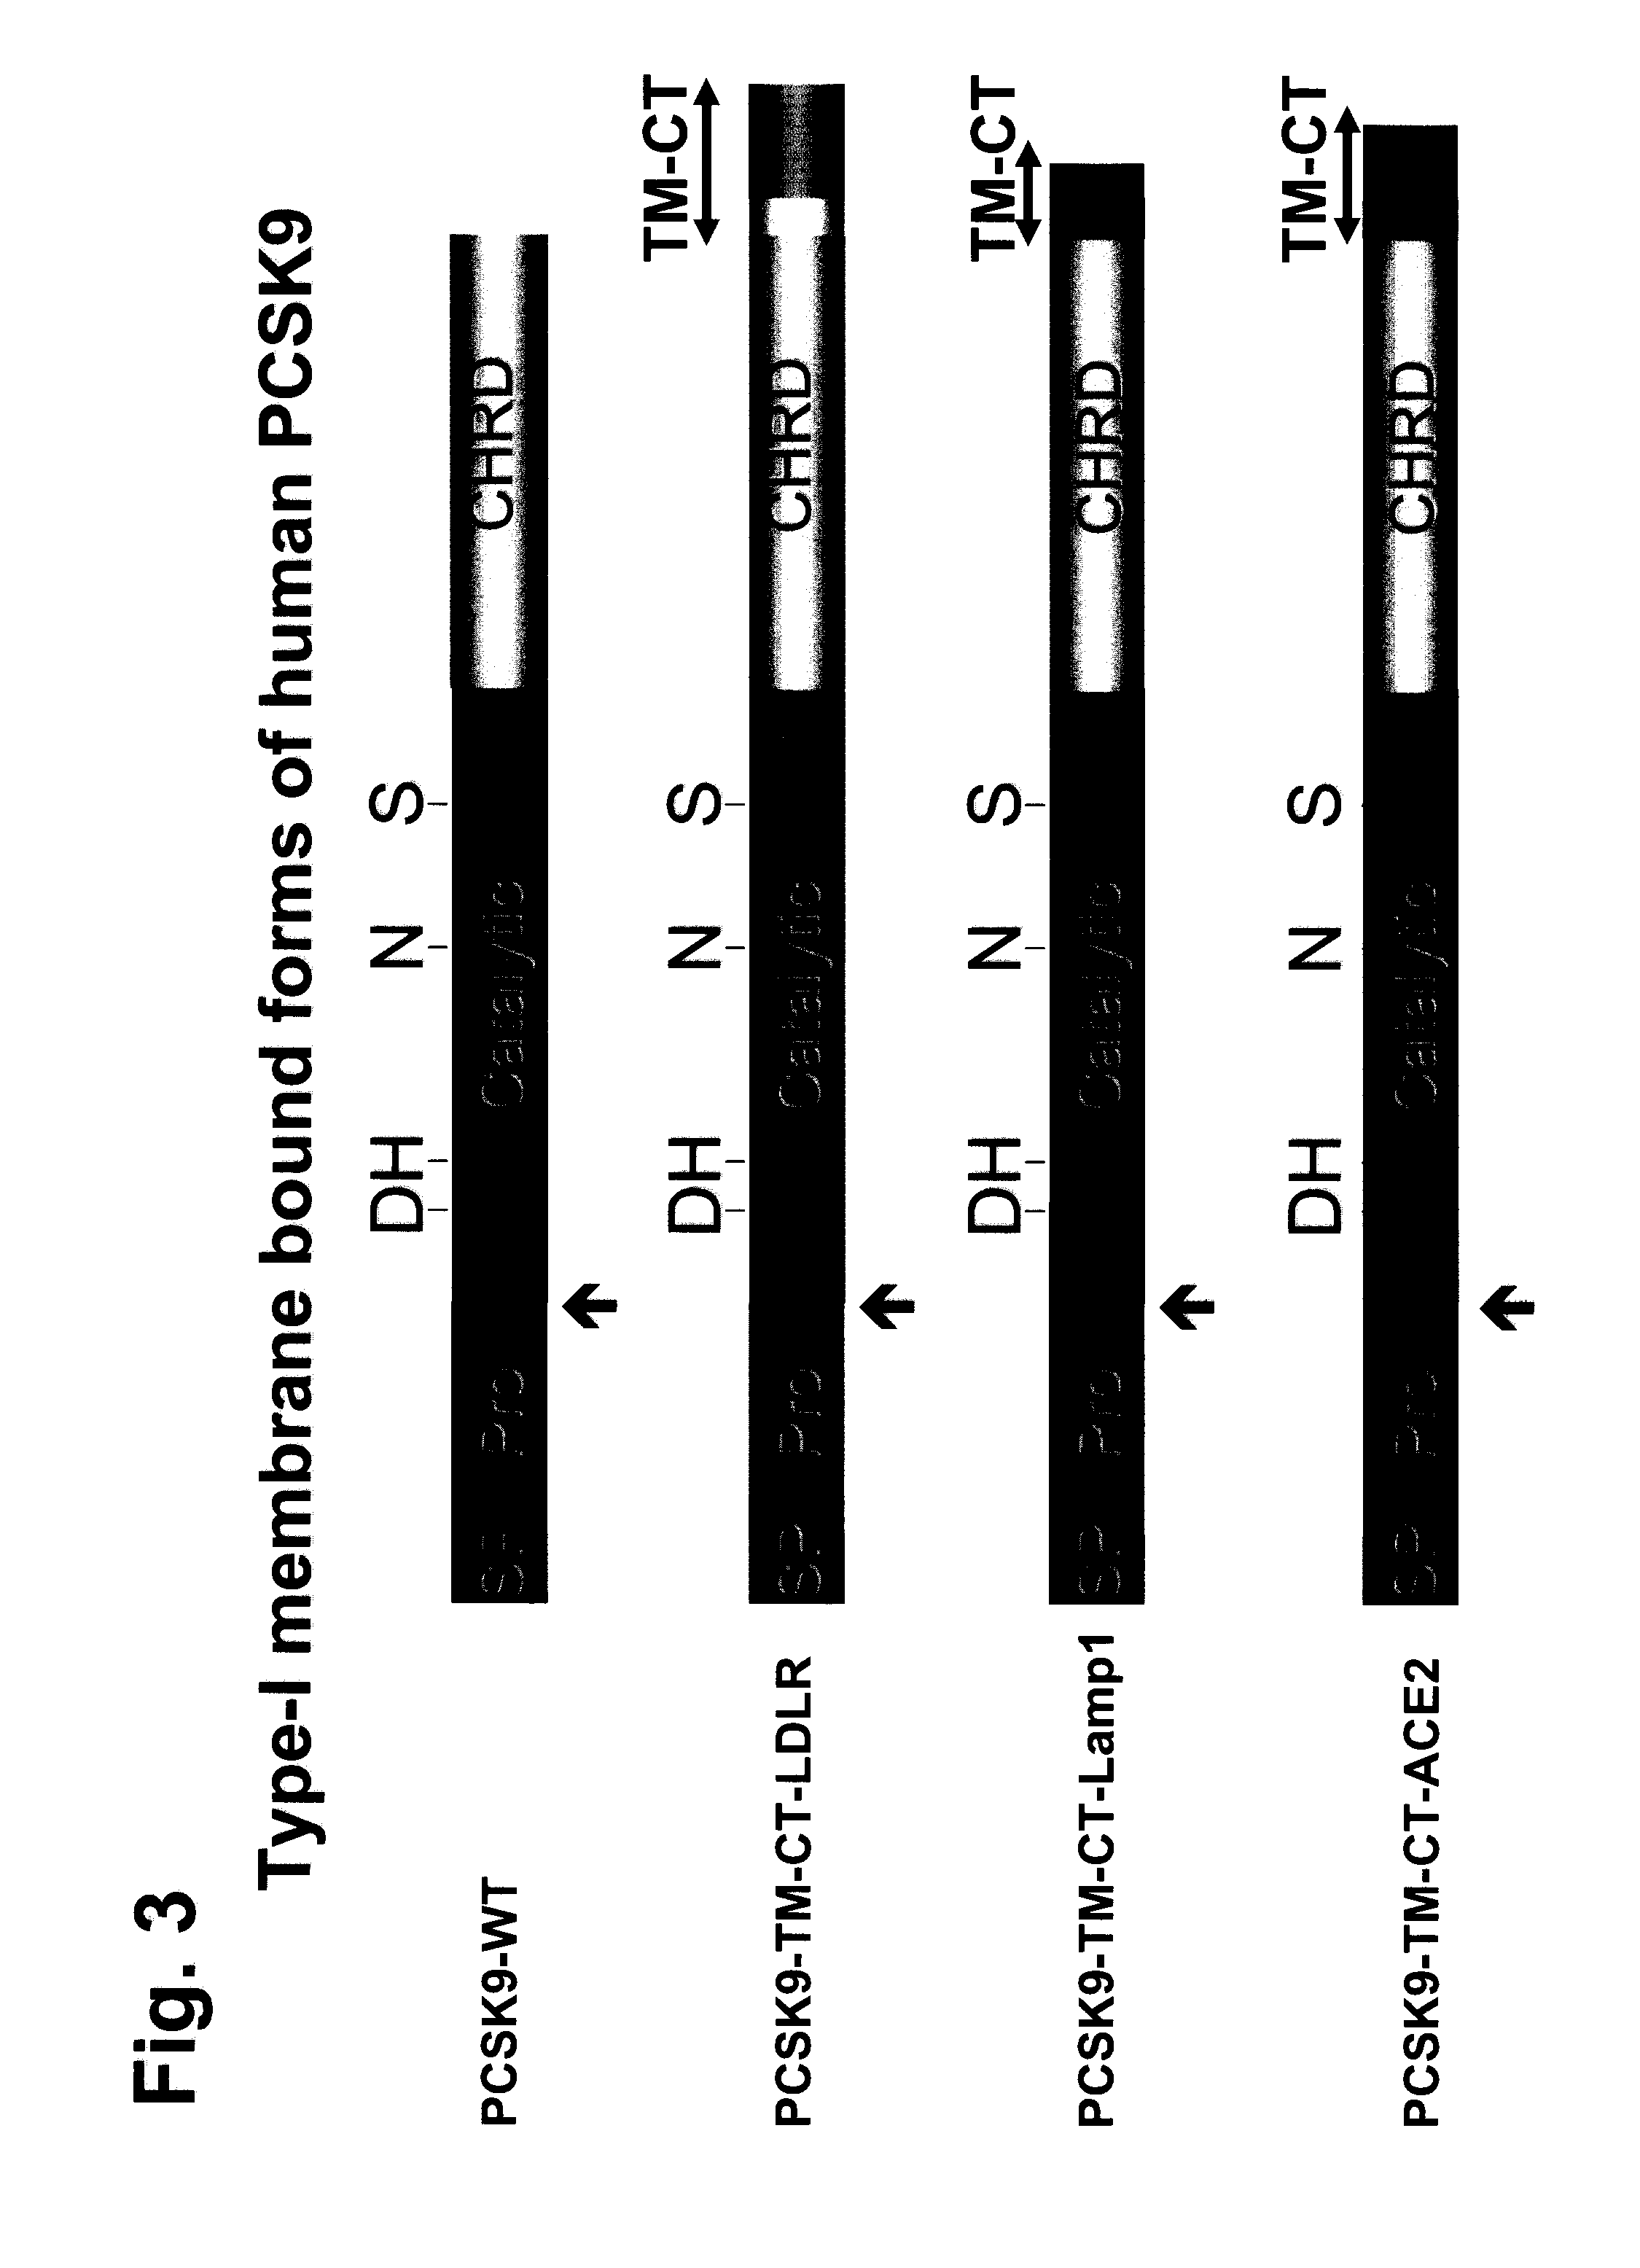 Chimeric PCSK9 proteins, cells comprising same, and assays using same